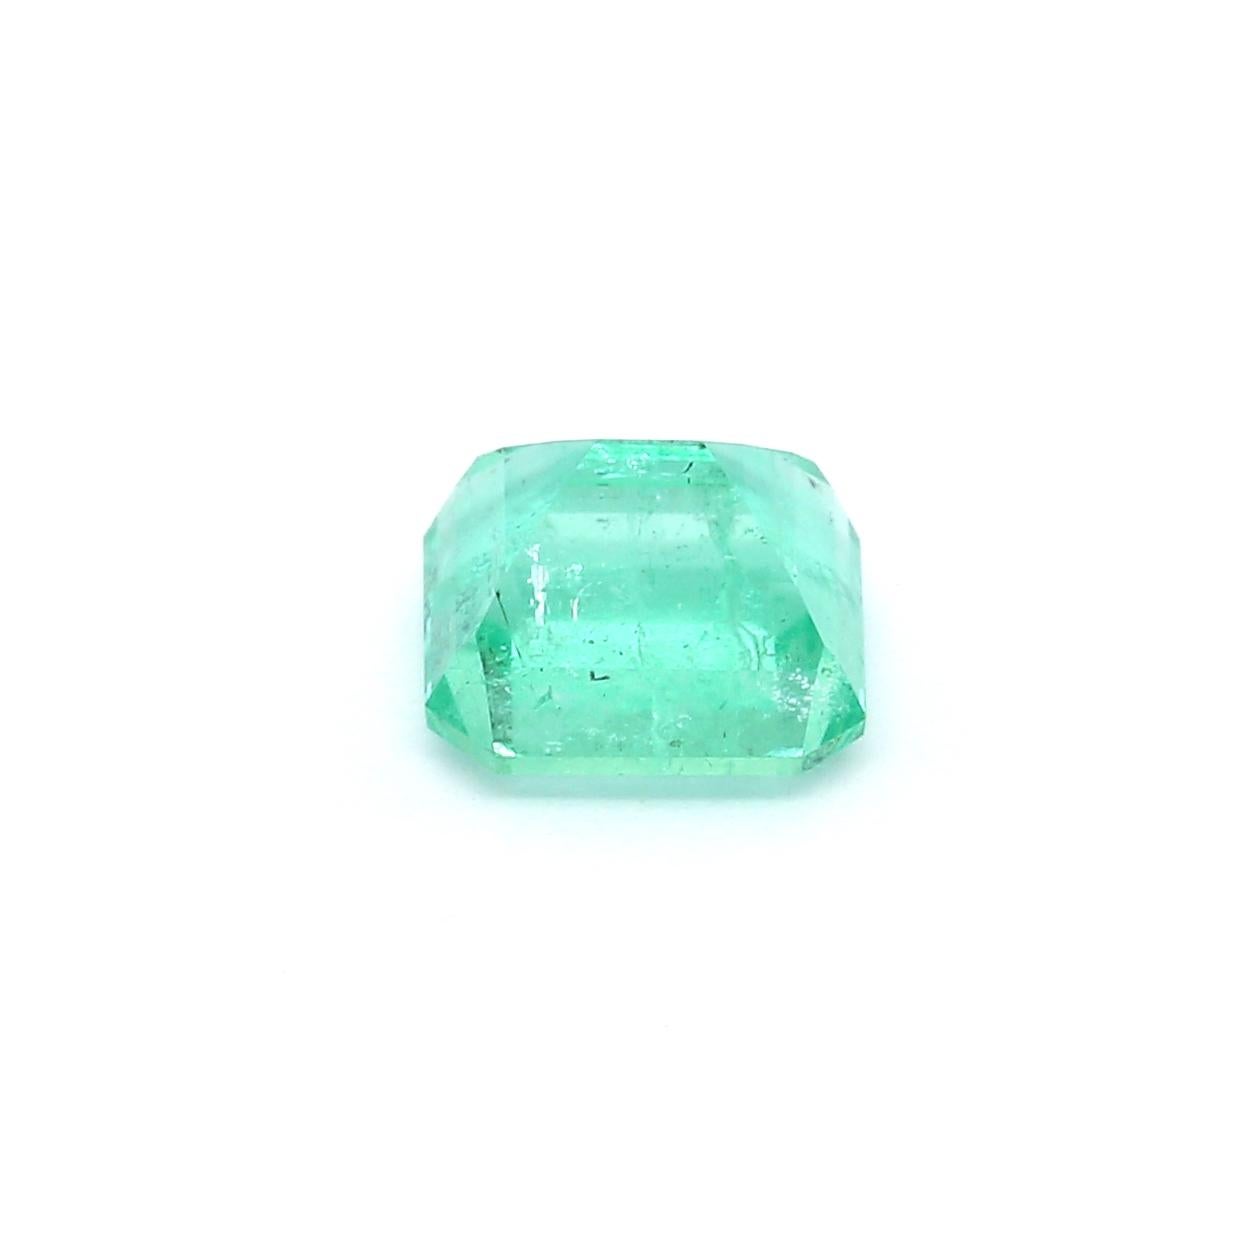 An amazing Russian Emerald which allows jewelers to create a unique piece of wearable art.
This exceptional quality gemstone would make a custom-made jewelry design. Perfect for a Ring or Pendant.

Shape - Octagon
Weight - 2.1 ct
Treatment -